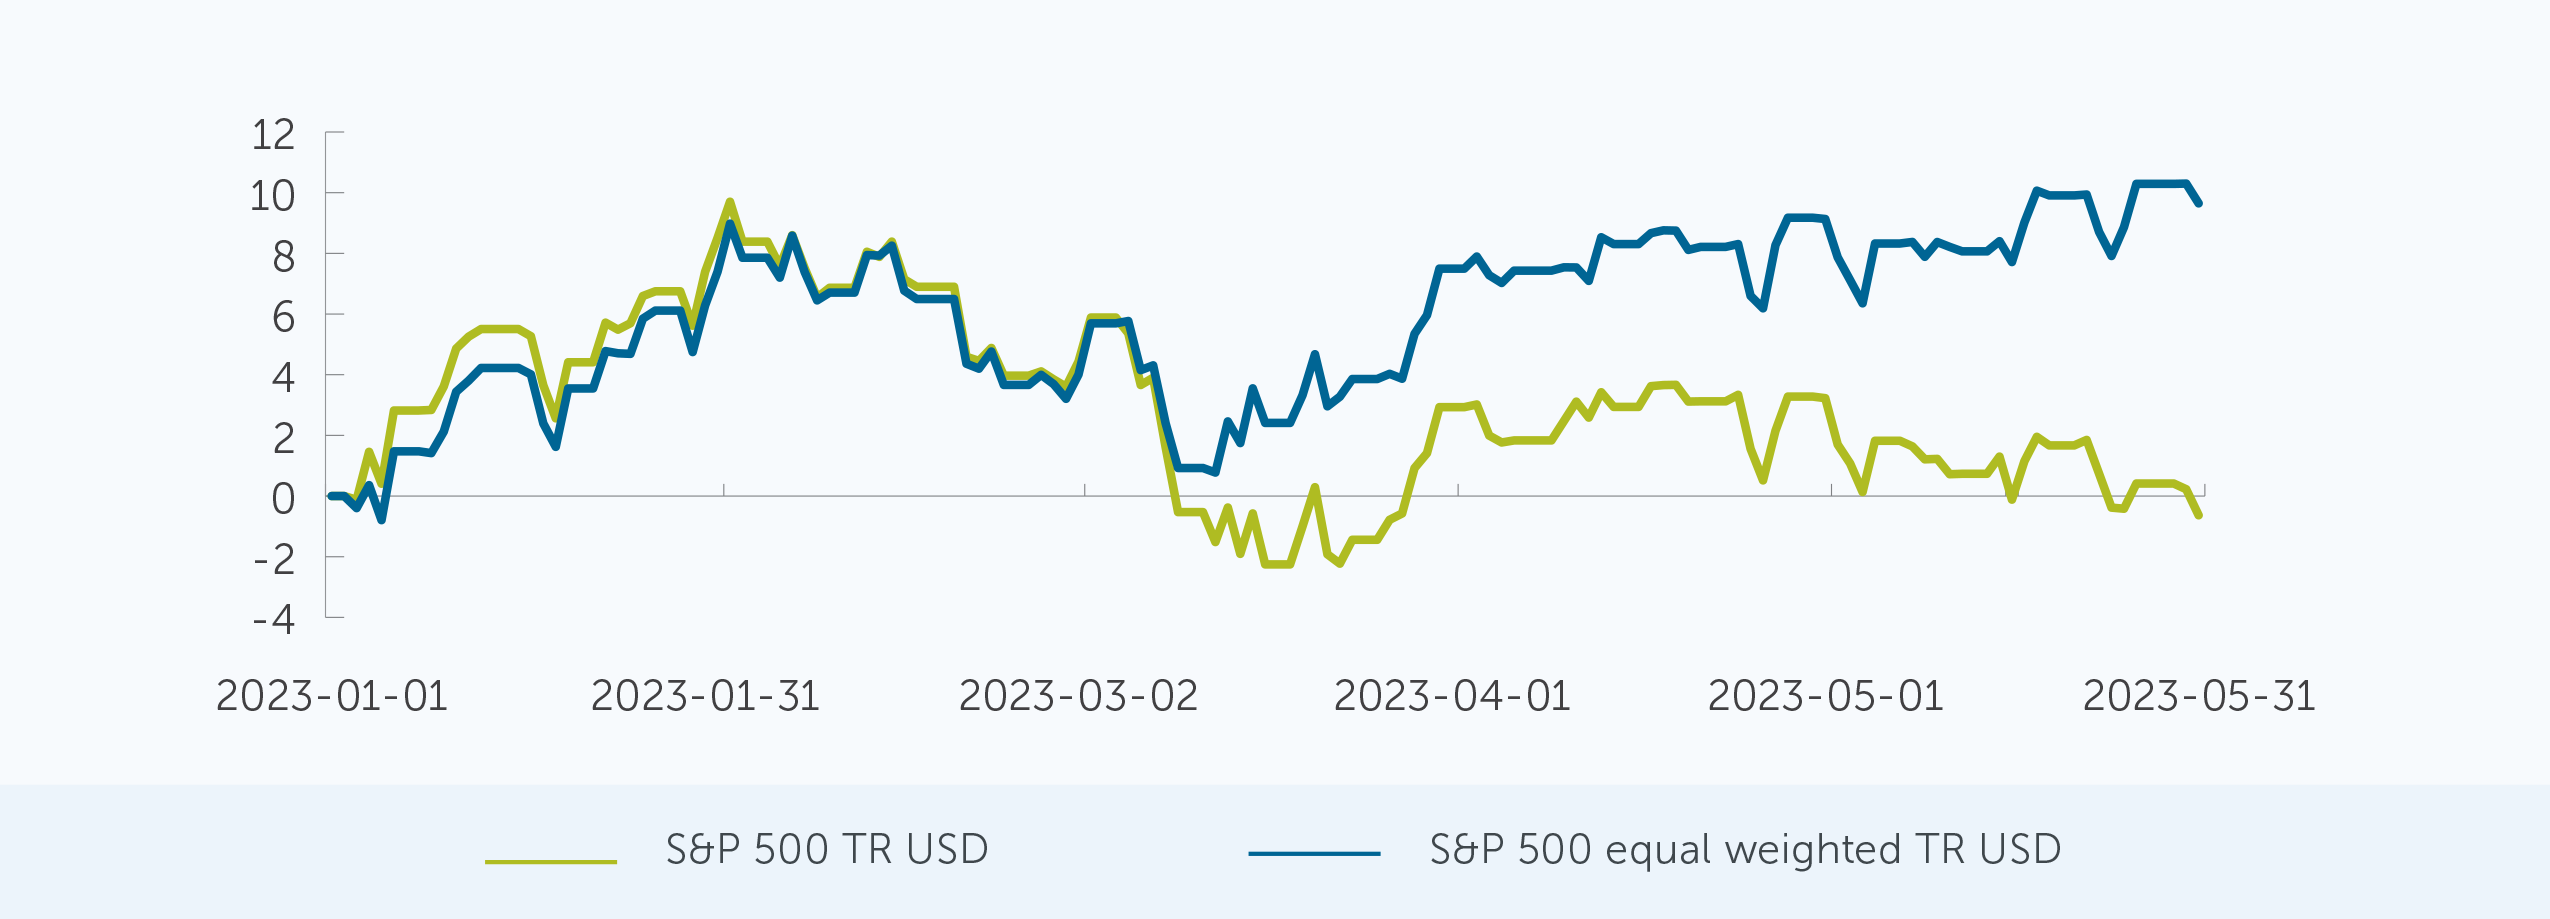 A comparison between the returns of the S&P 500 Index, and the S&P 500 Equal Weight Index